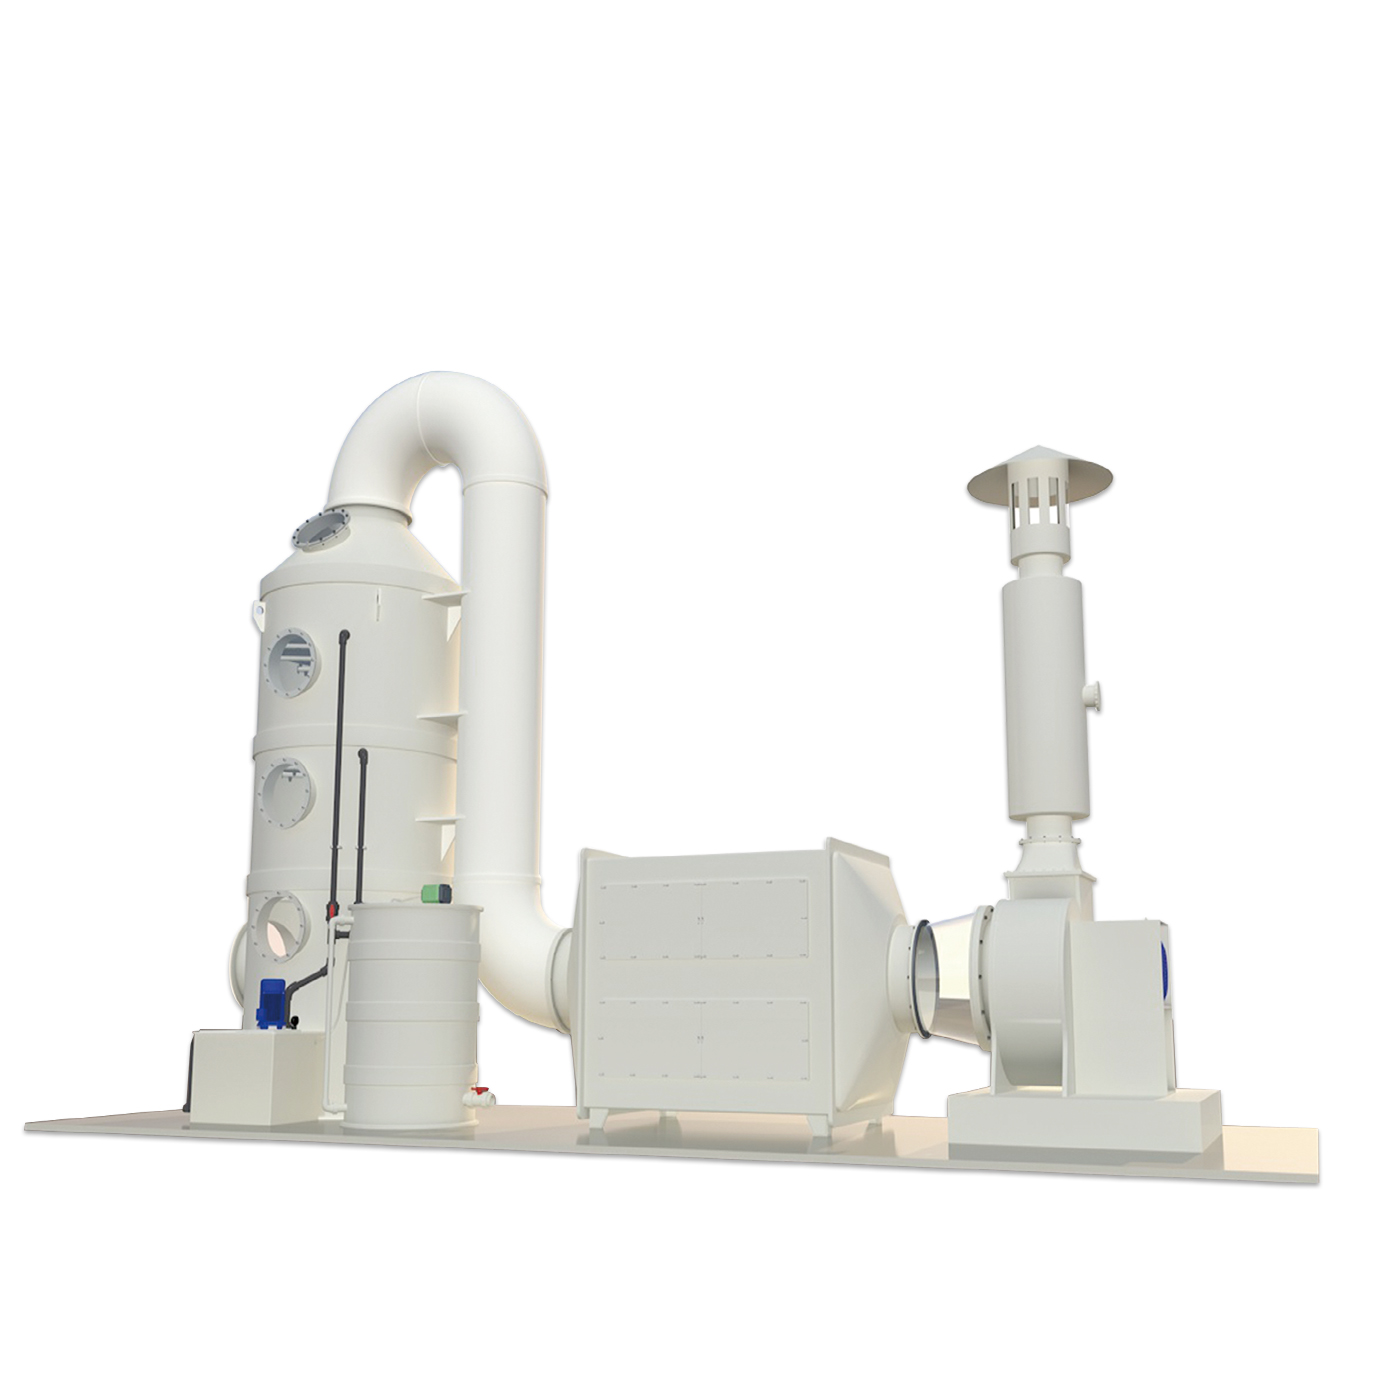 Exhaust gas scrubber system